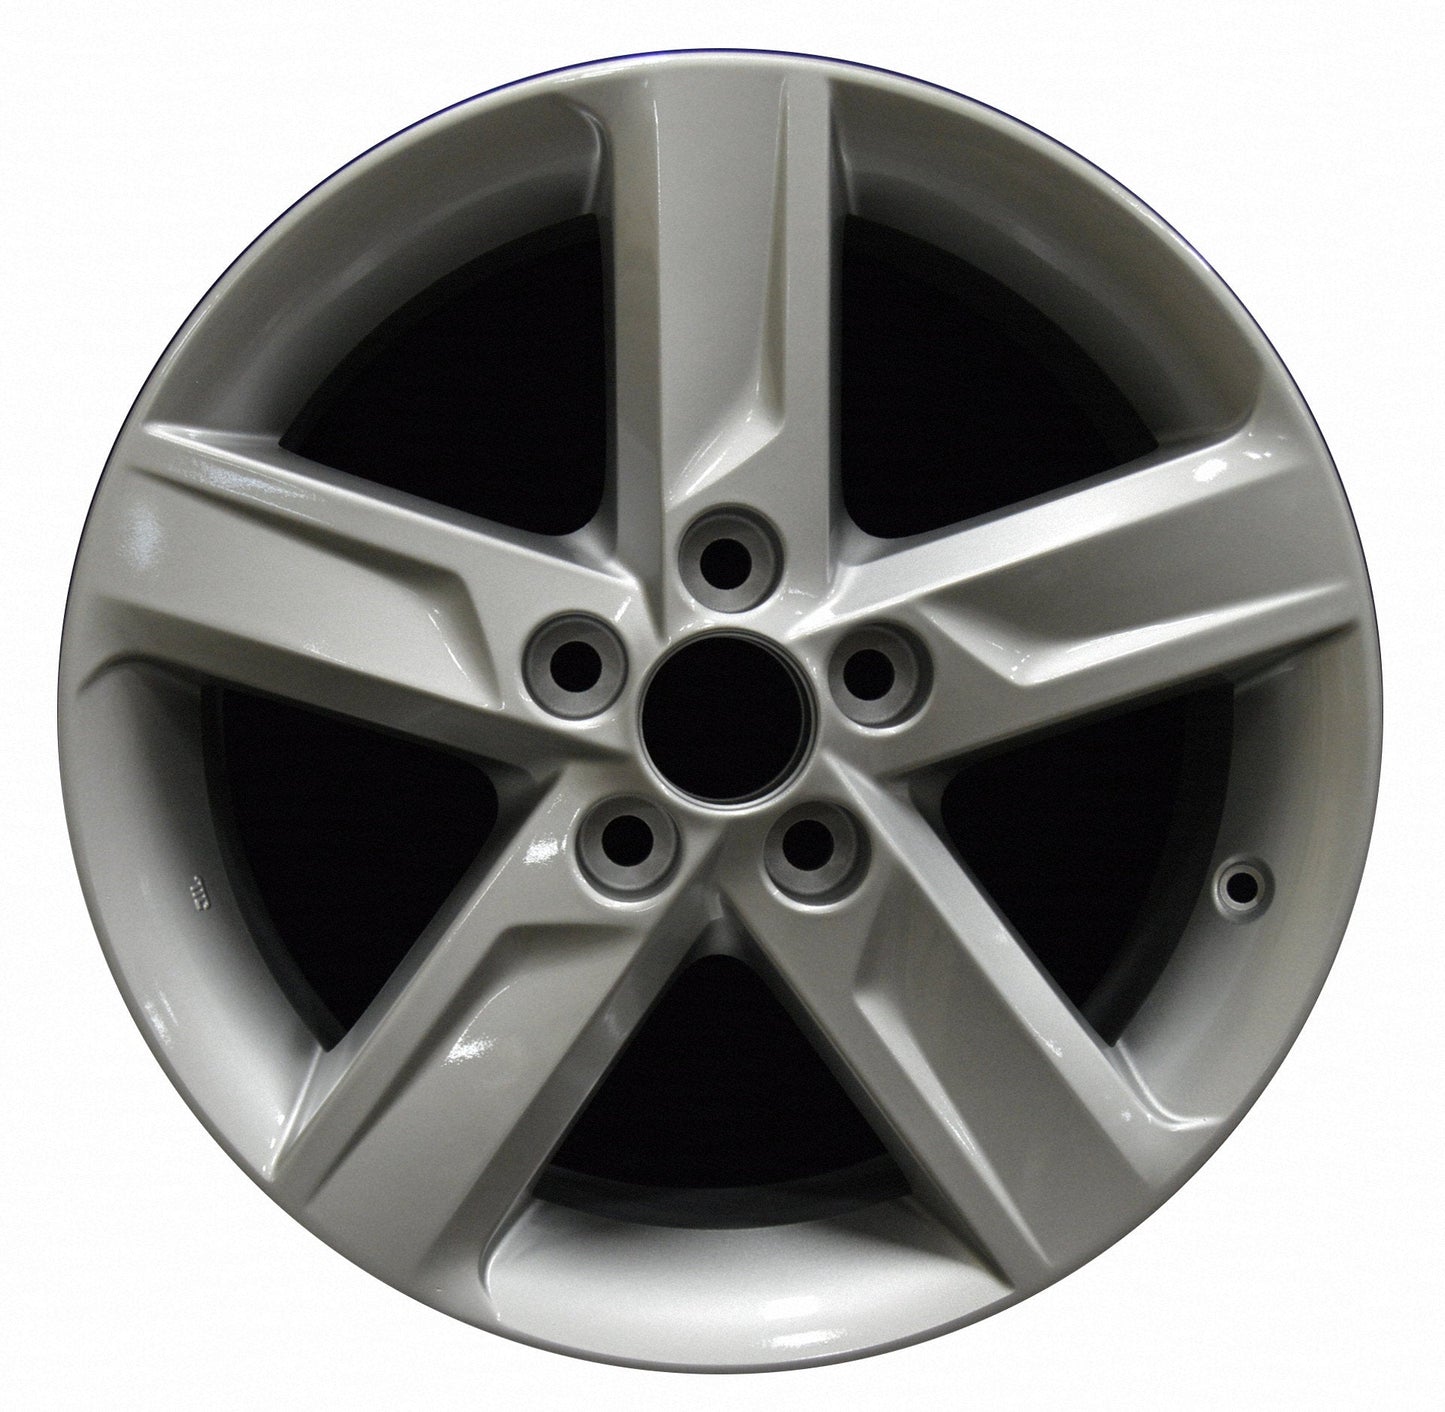 Toyota Camry  2009, 2010, 2011, 2012, 2013, 2014 Factory OEM Car Wheel Size 17x7 Alloy WAO.69604.LS01.FF